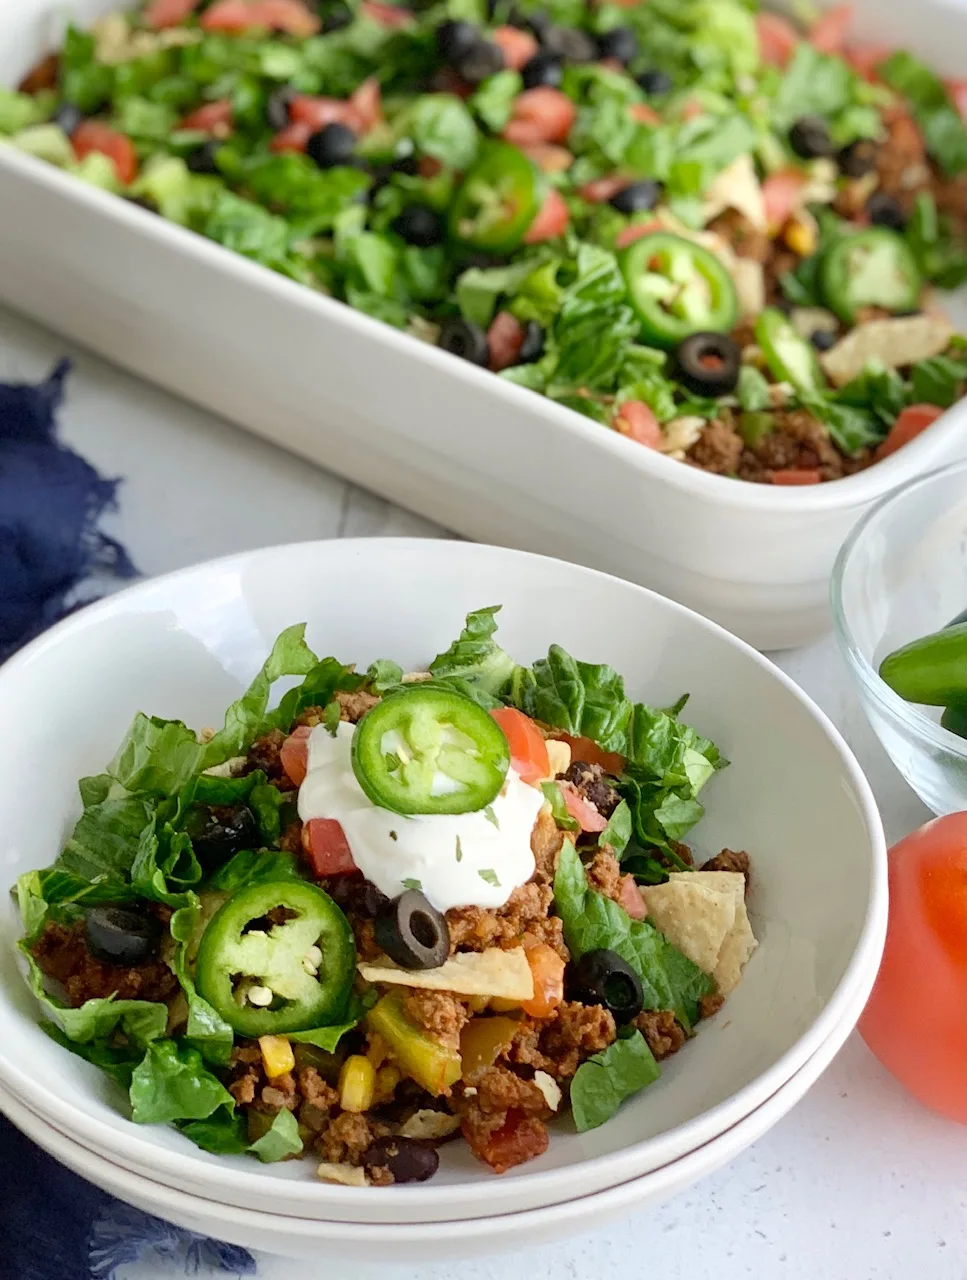 A dinner bowl filled with refried beans, taco meat sauce, crunched up chips, shredded romaine lettuce, diced tomatoes, jalapeno peppers, and black olives. Then topped with a dollop of dairy free sour cream,